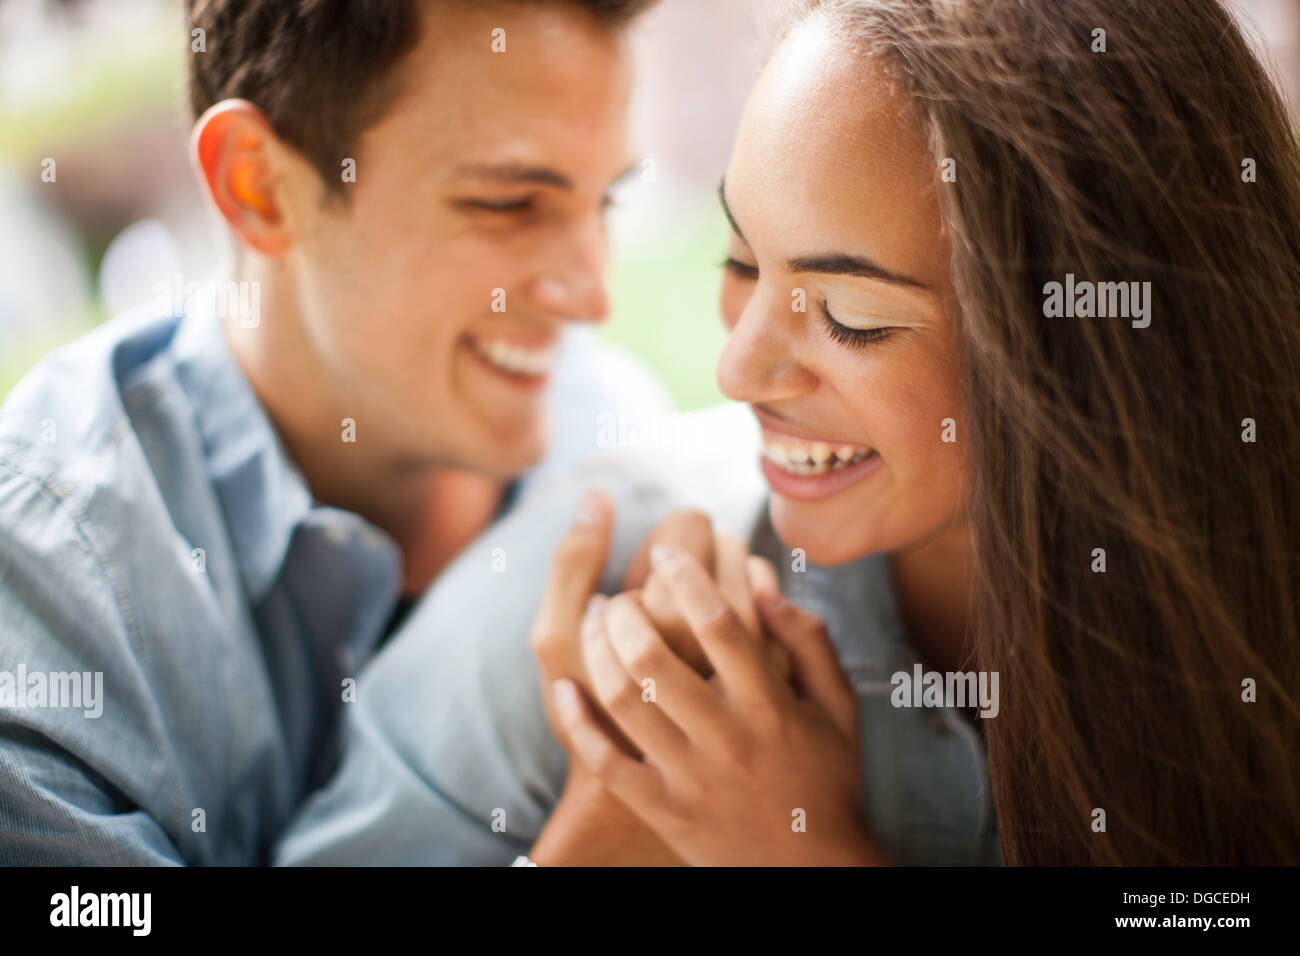 Young couple holding hands and smiling, close up Stock Photo